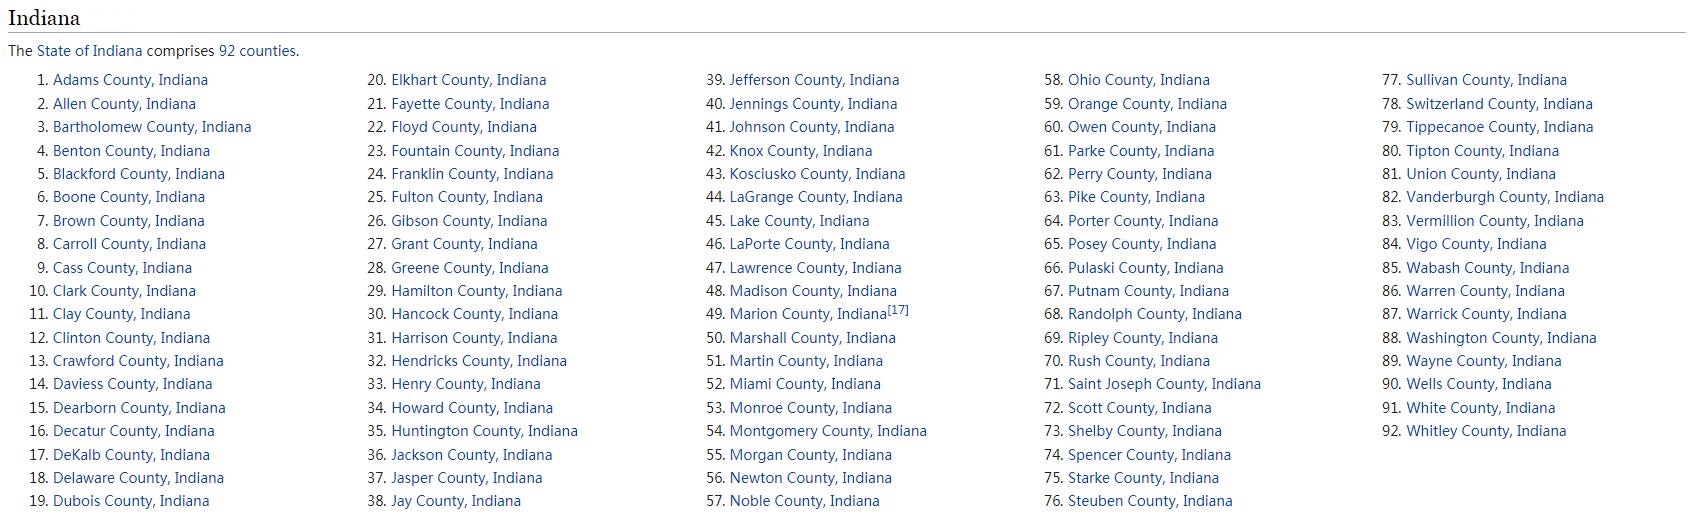 Indiana Counties List